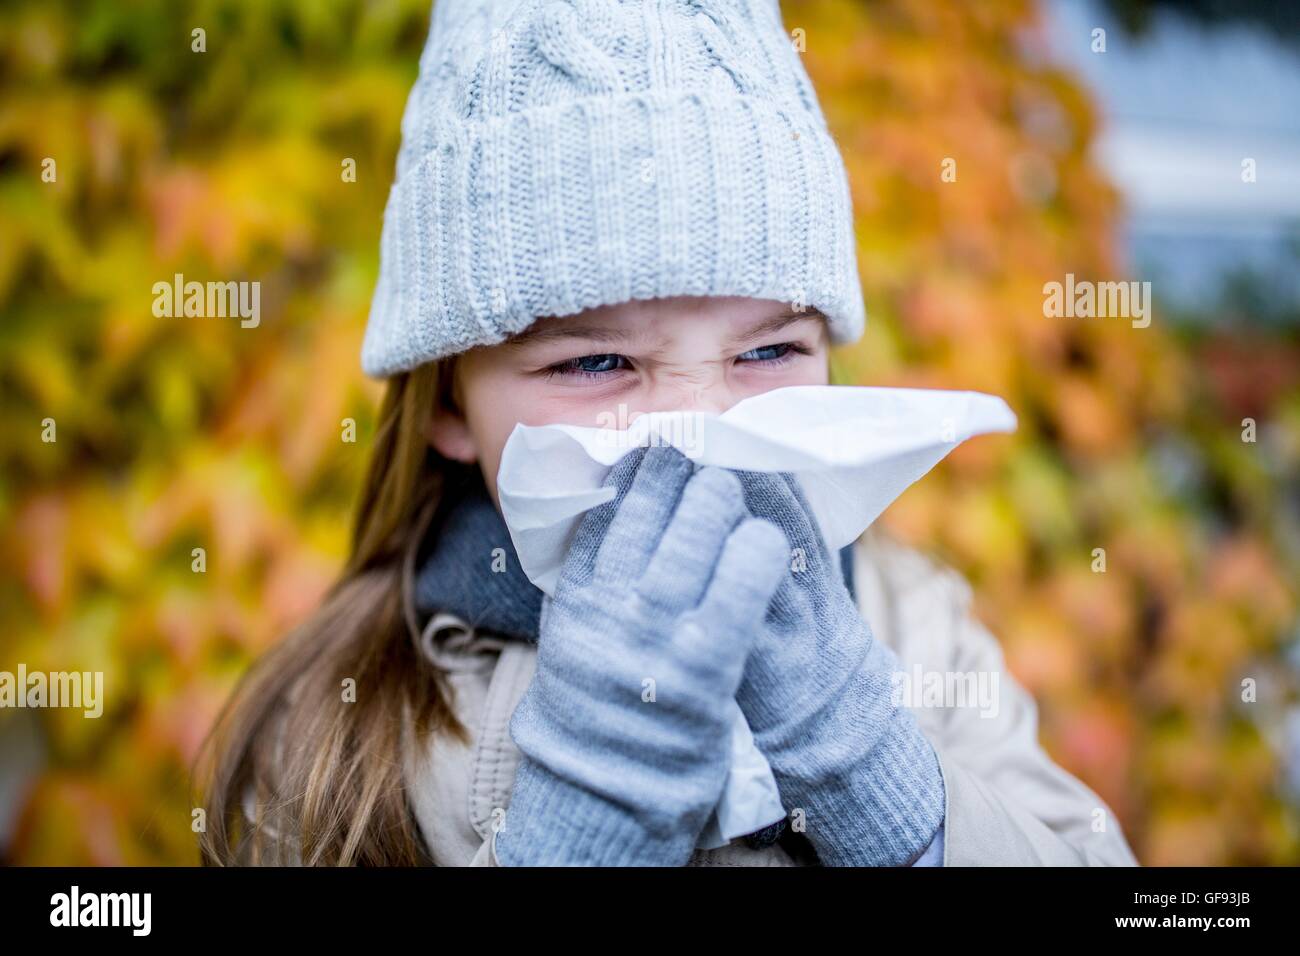 MODEL RELEASED. Young girl sneezing, close-up. Stock Photo